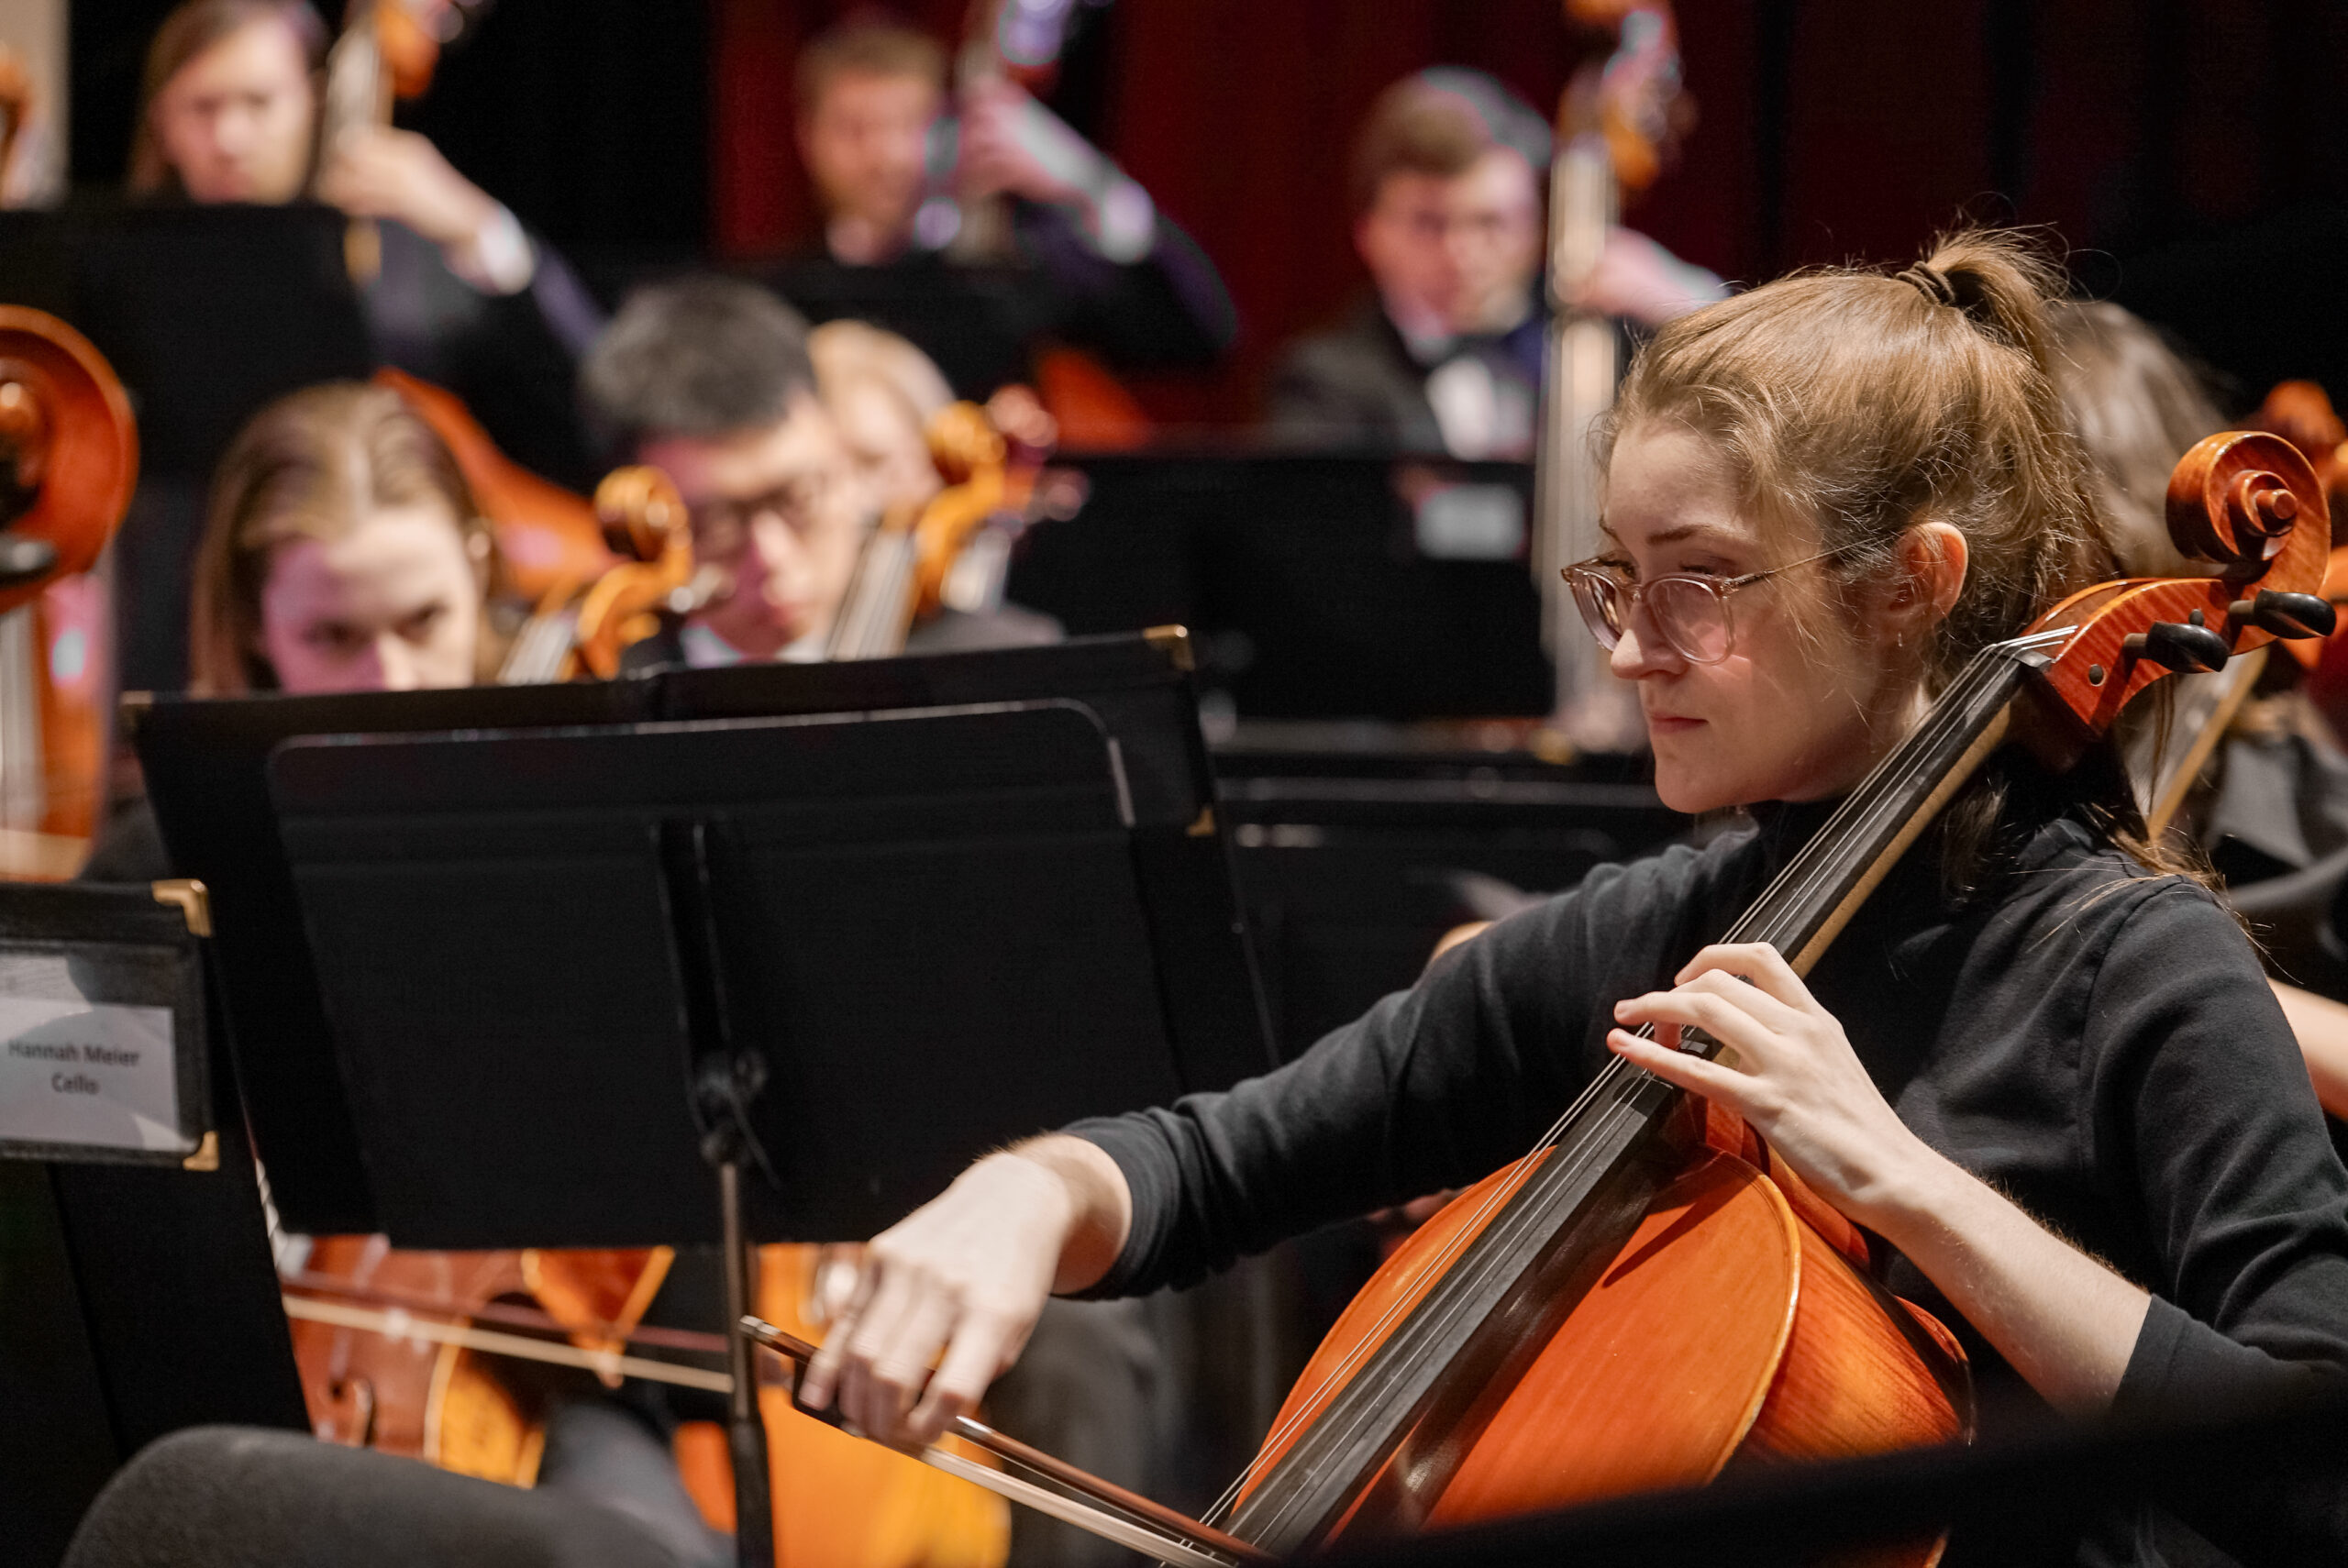 Student performs in an orchestra concert.